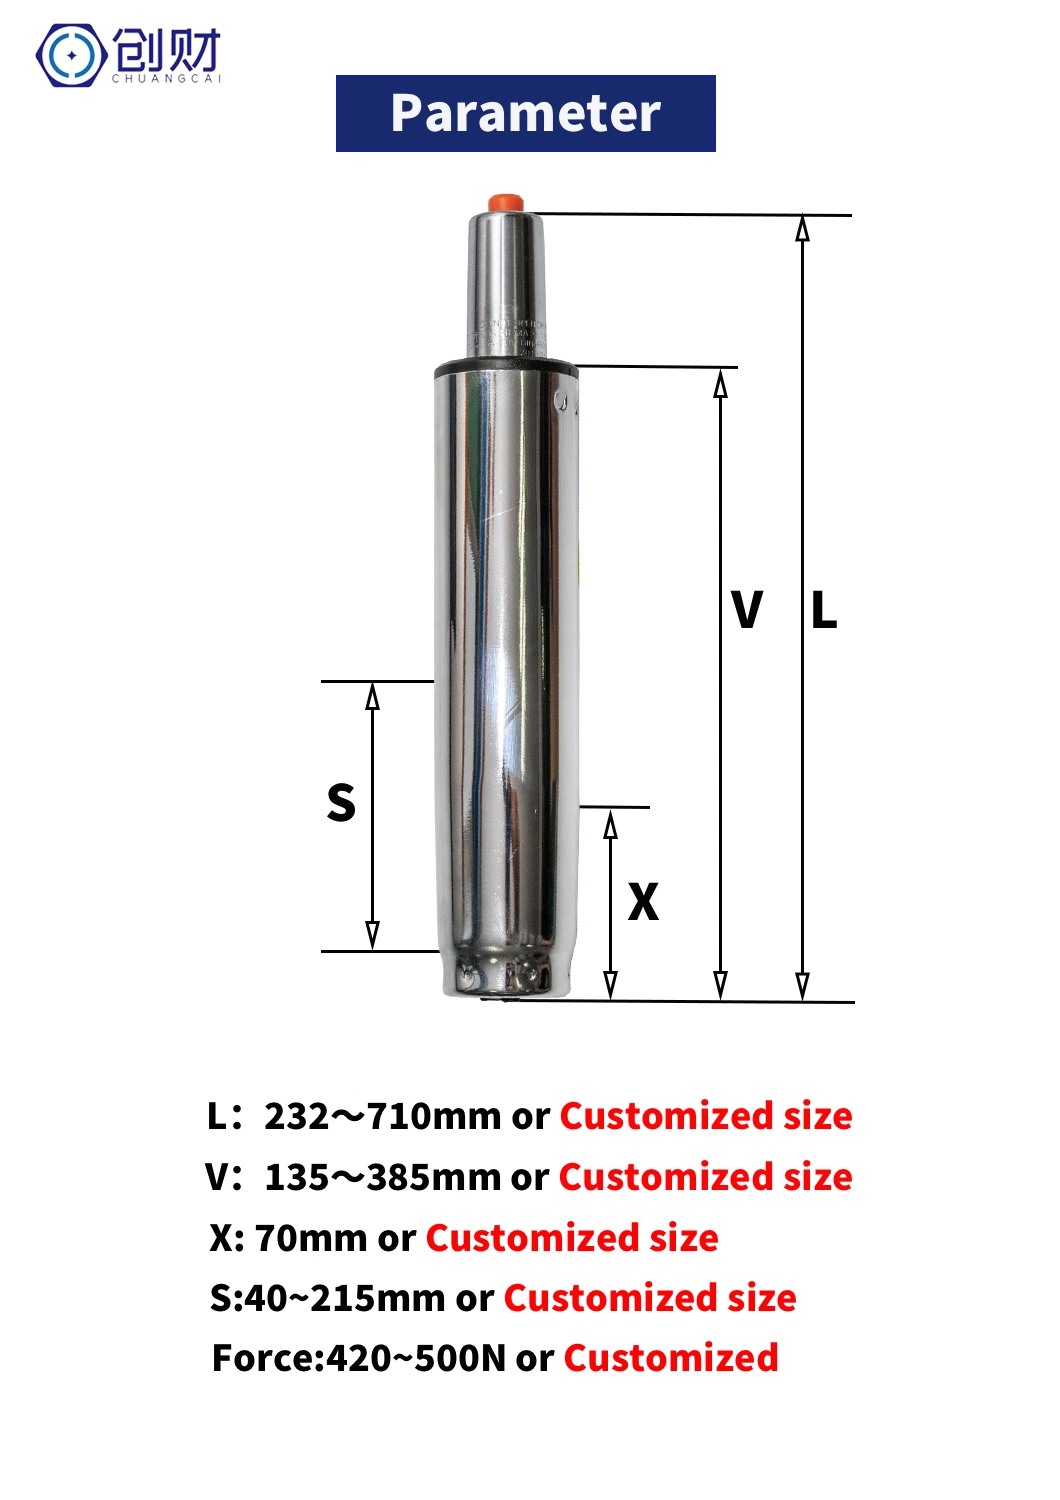 Mini Gas Spring with Small Size Can Be Put in Small Equipment